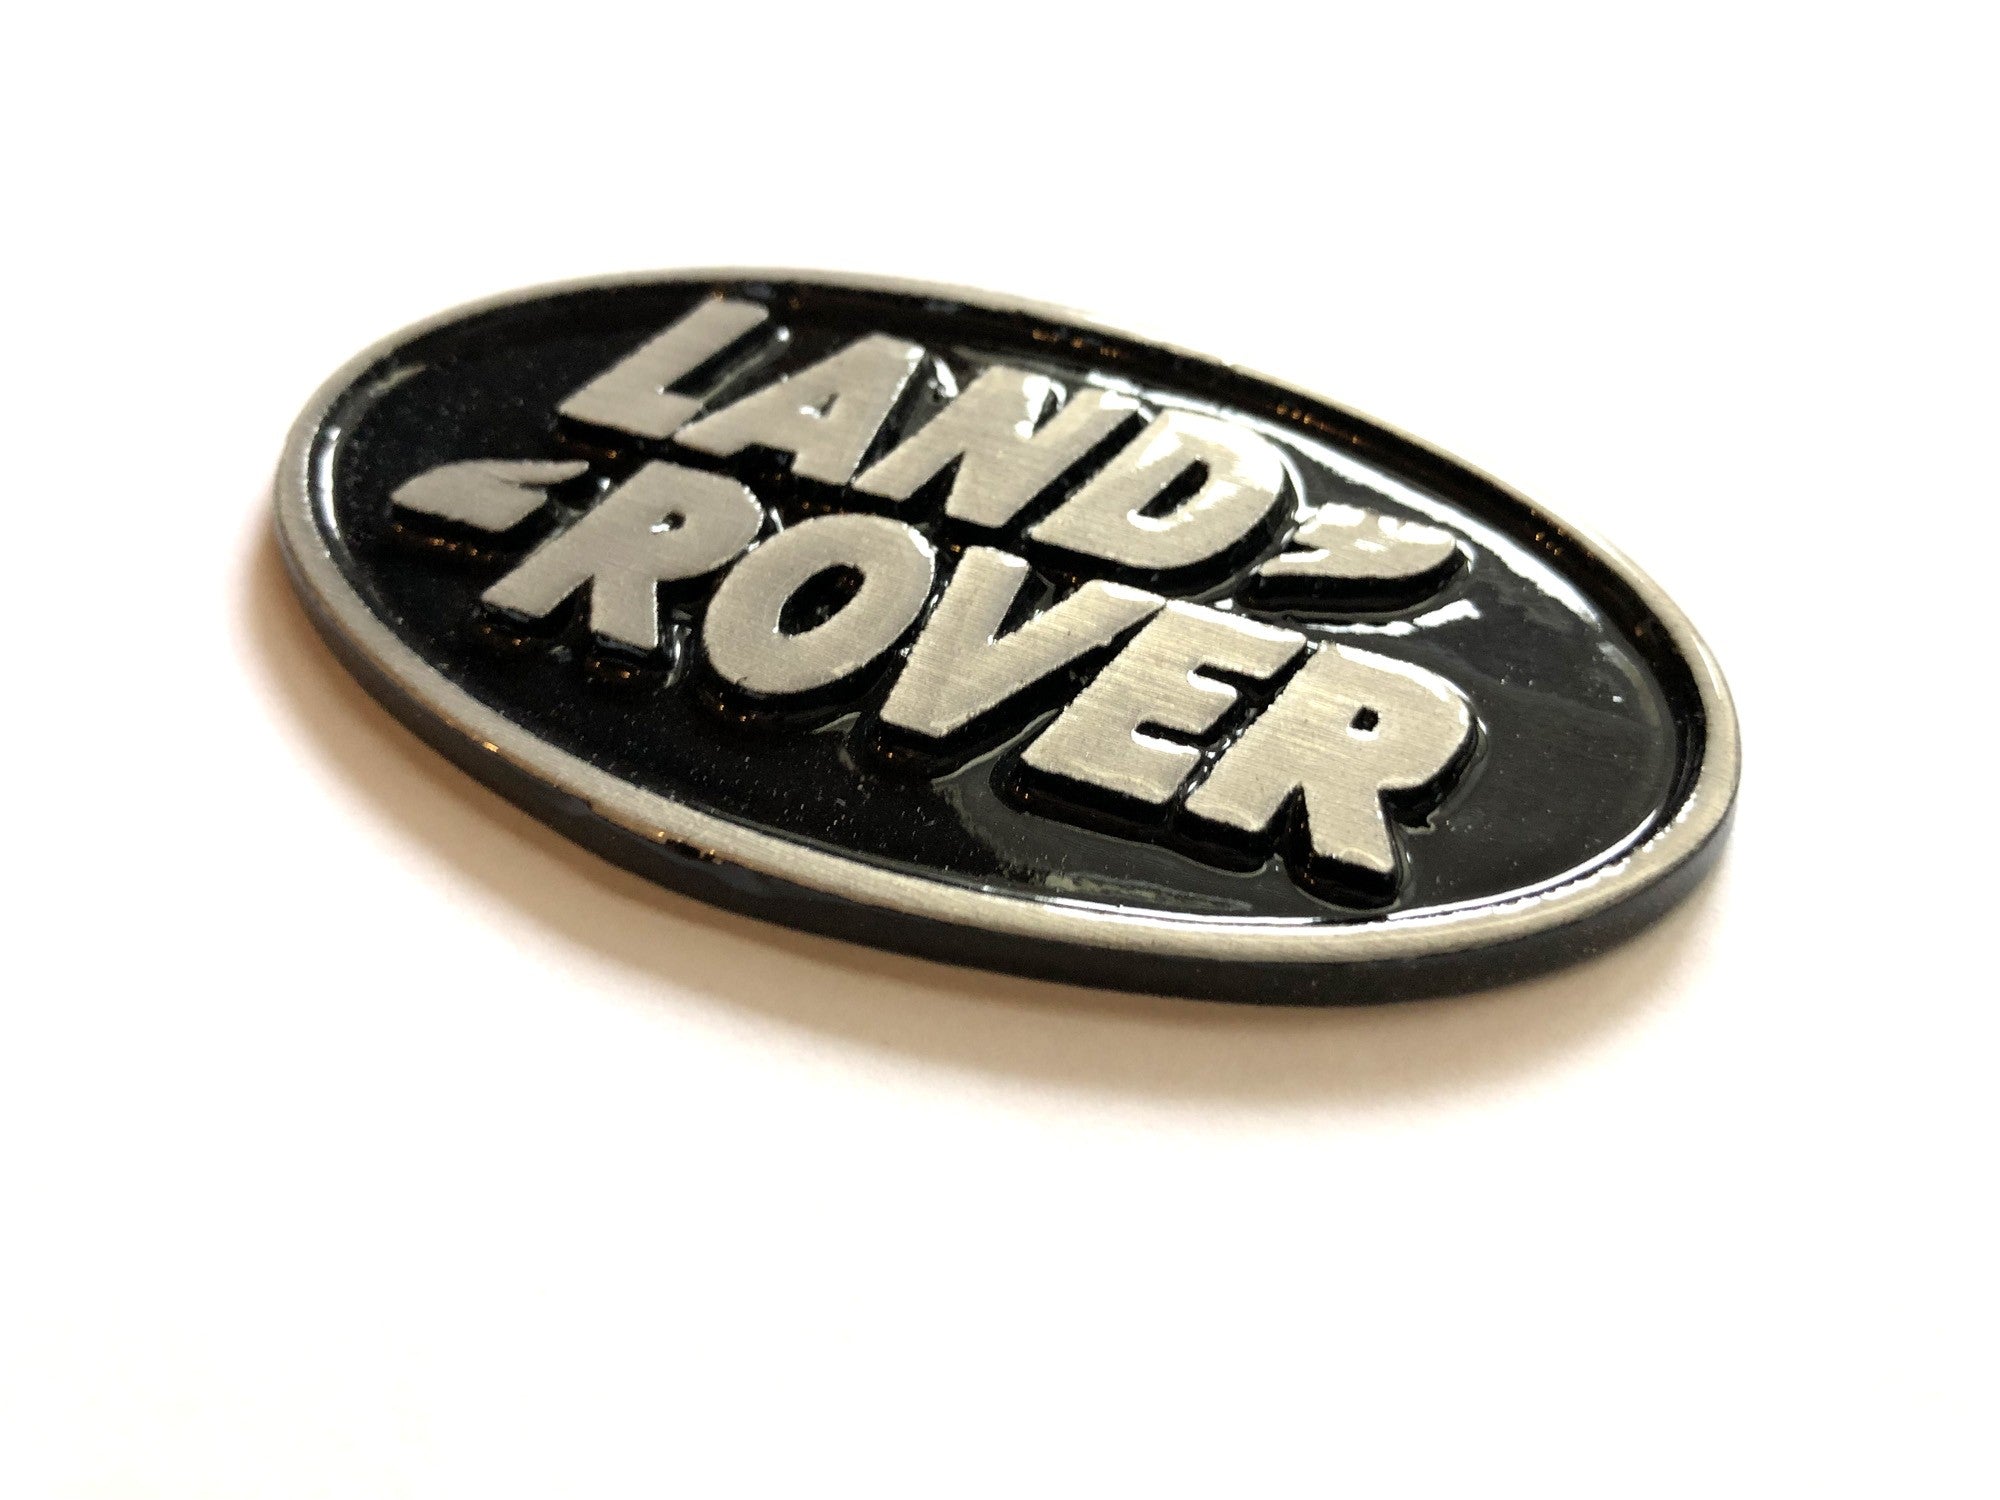 "Land Rover" Small Oval Badge (Cast Aluminum)